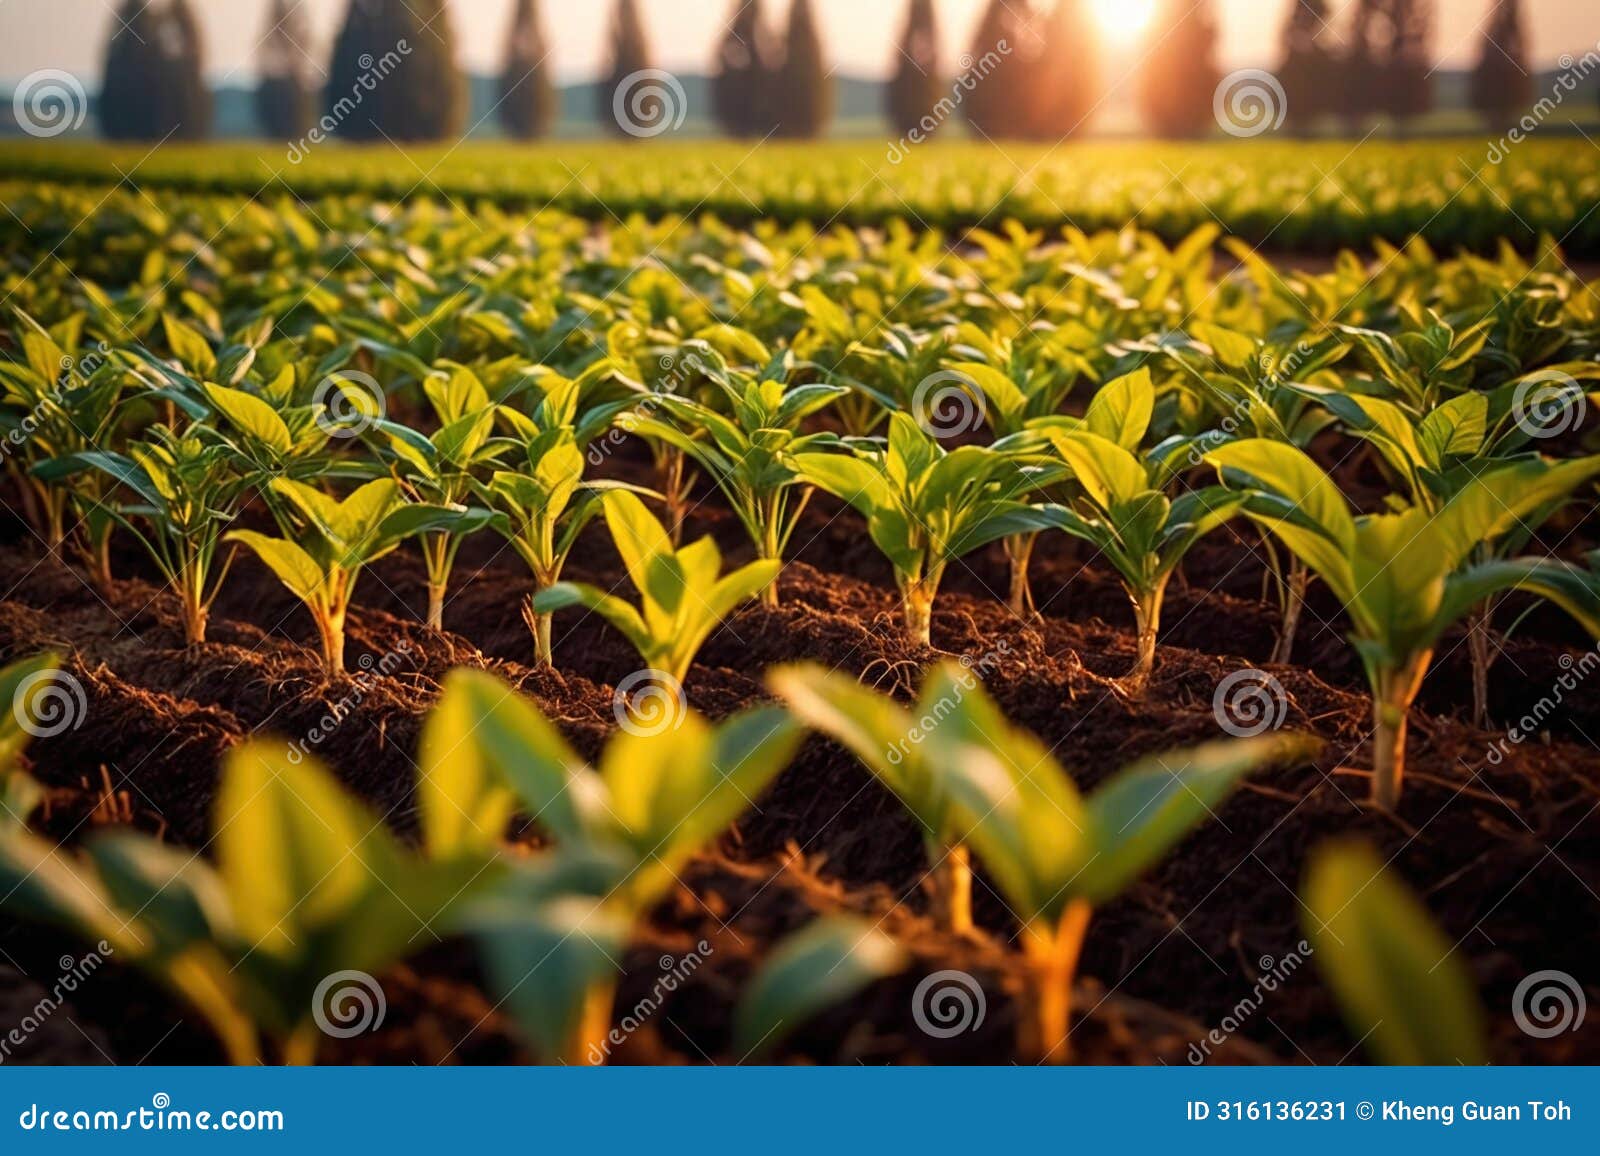 modern industrialized agriculture using technology, agritech farming of crops